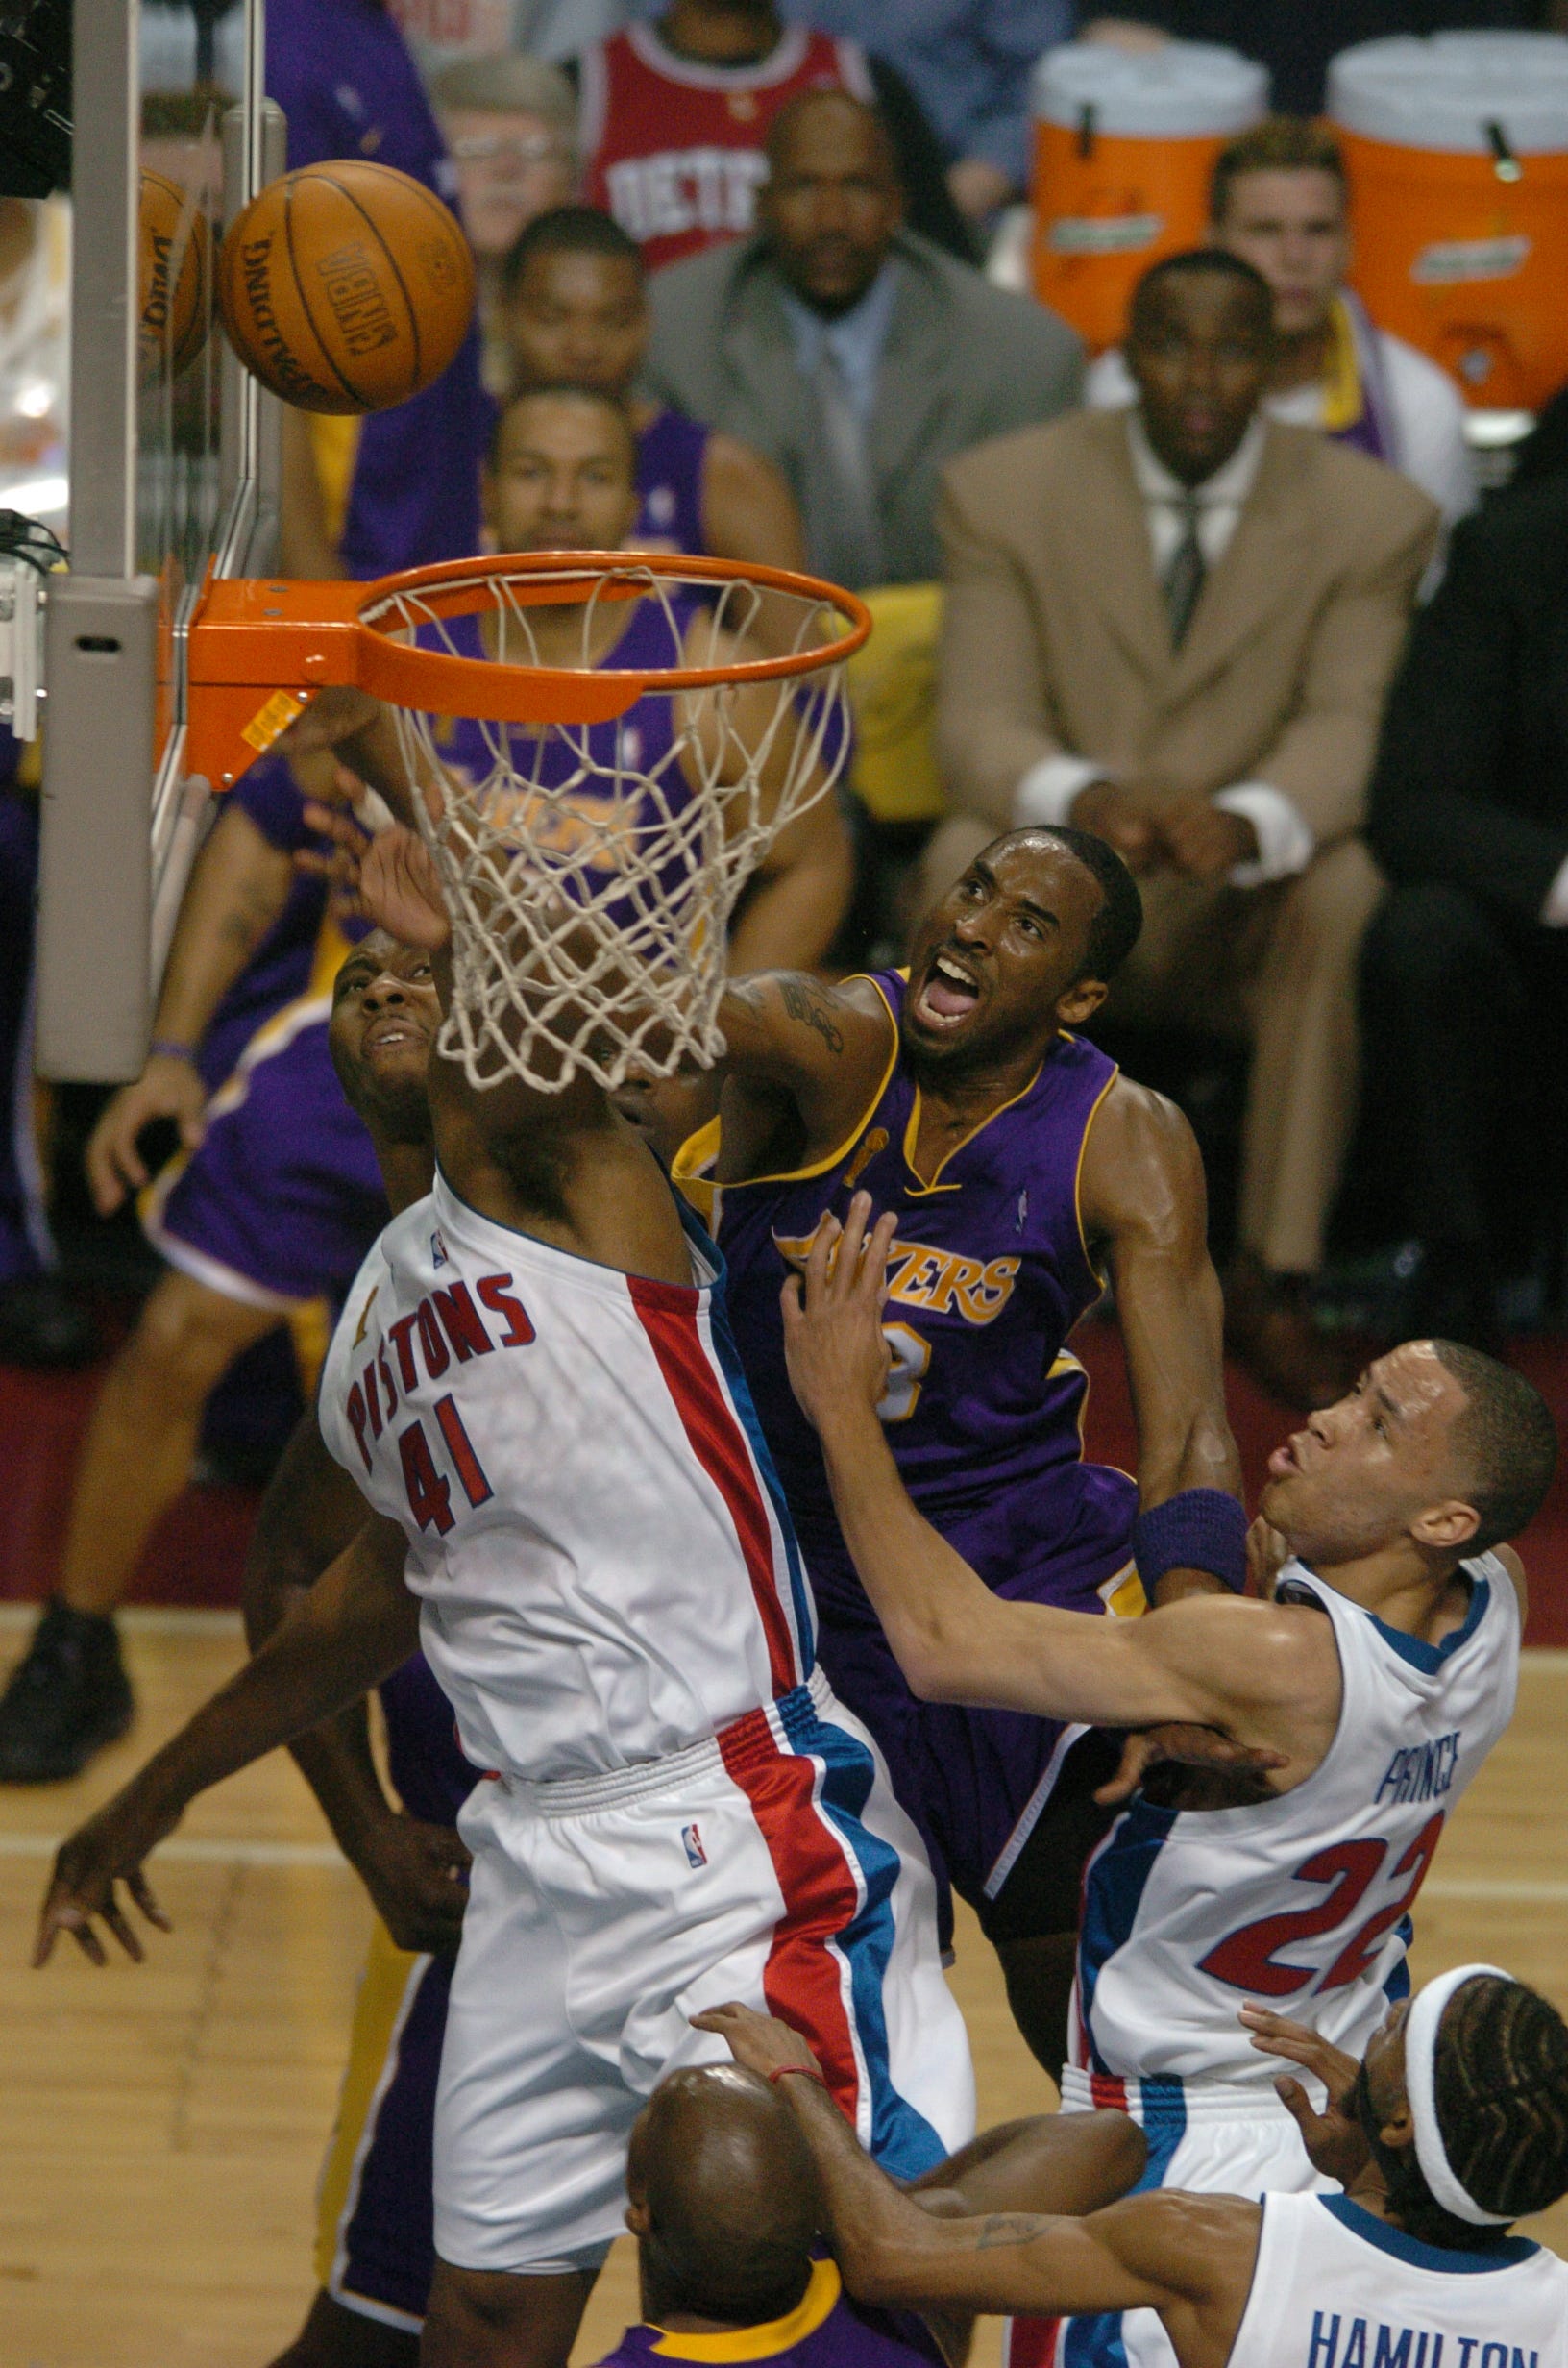 Kobe Bryant and Elden Campbell mix it up under the basket as the Pistons host the Lakers in Game 5 of the NBA Finals in 2004.